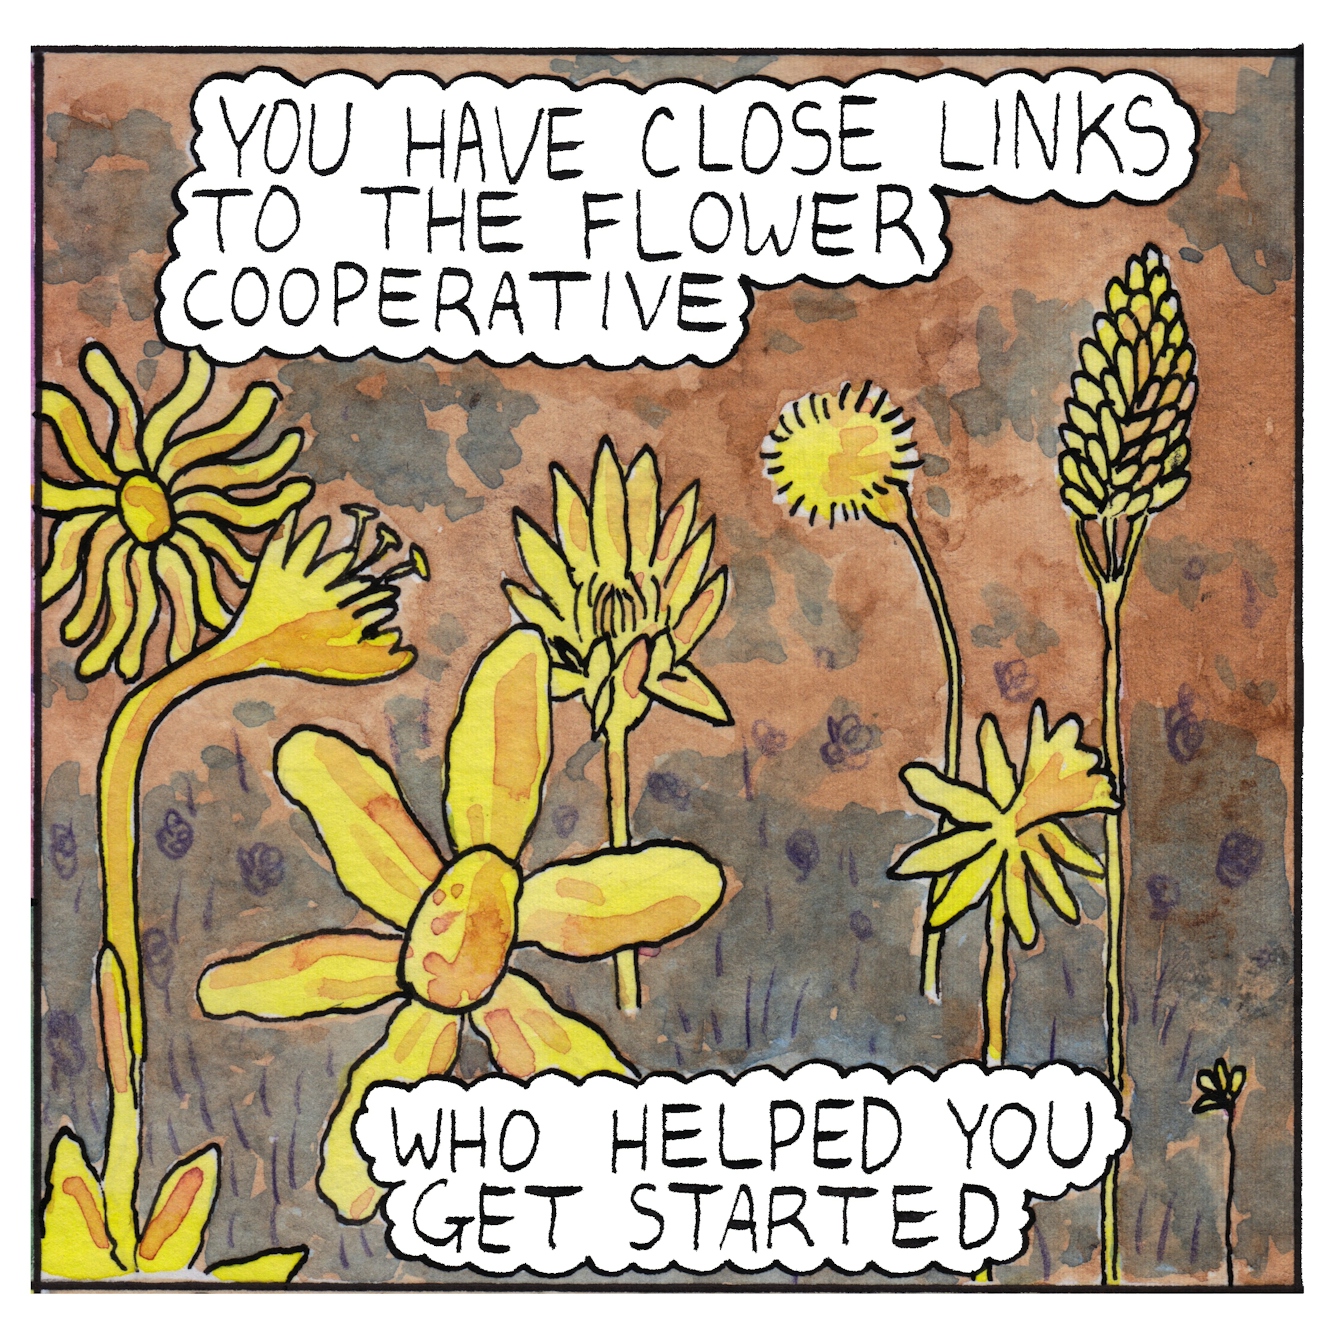 Panel 2 of a six-panel comic made with ink, watercolour and colour pencils: Seven different flowers, each with a different type of flower head fill the frame, some are on stiff, vertical stalks others with stalks bending to the right or left. Text bubbles at the top and bottom of the panel read: “You have close links to the flower cooperative, who helped you get started”